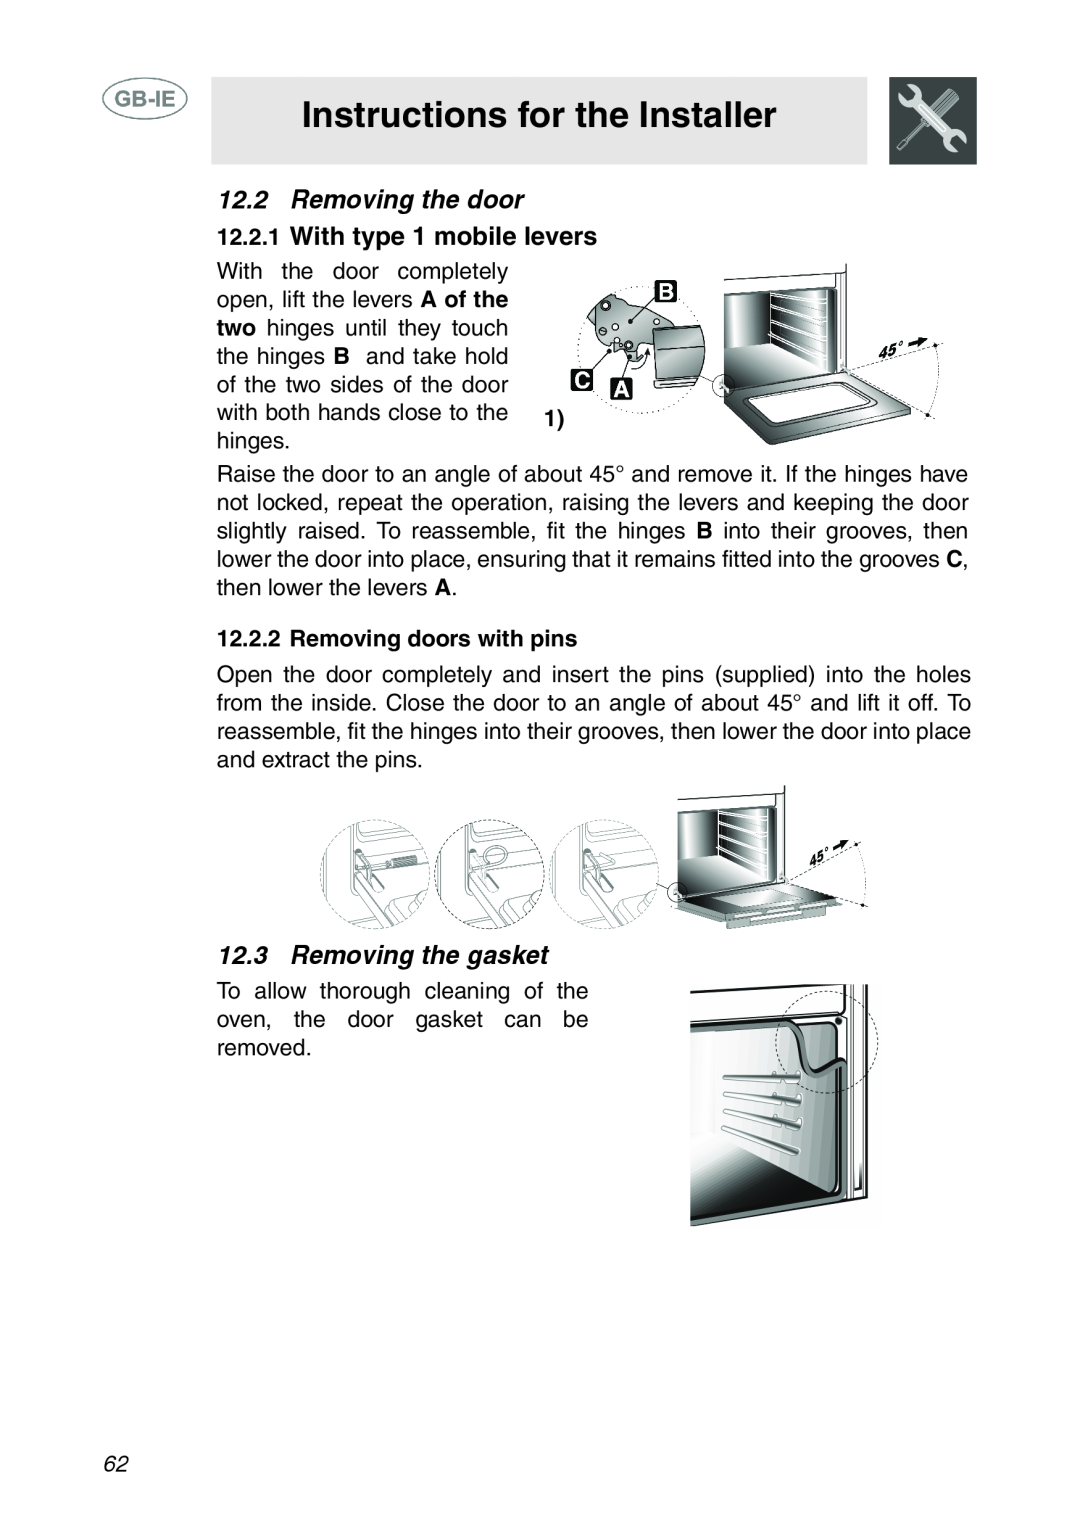 Smeg XXSC111P manual Instructions for the Installer, Removing the door, Removing the gasket, Removing doors with pins 